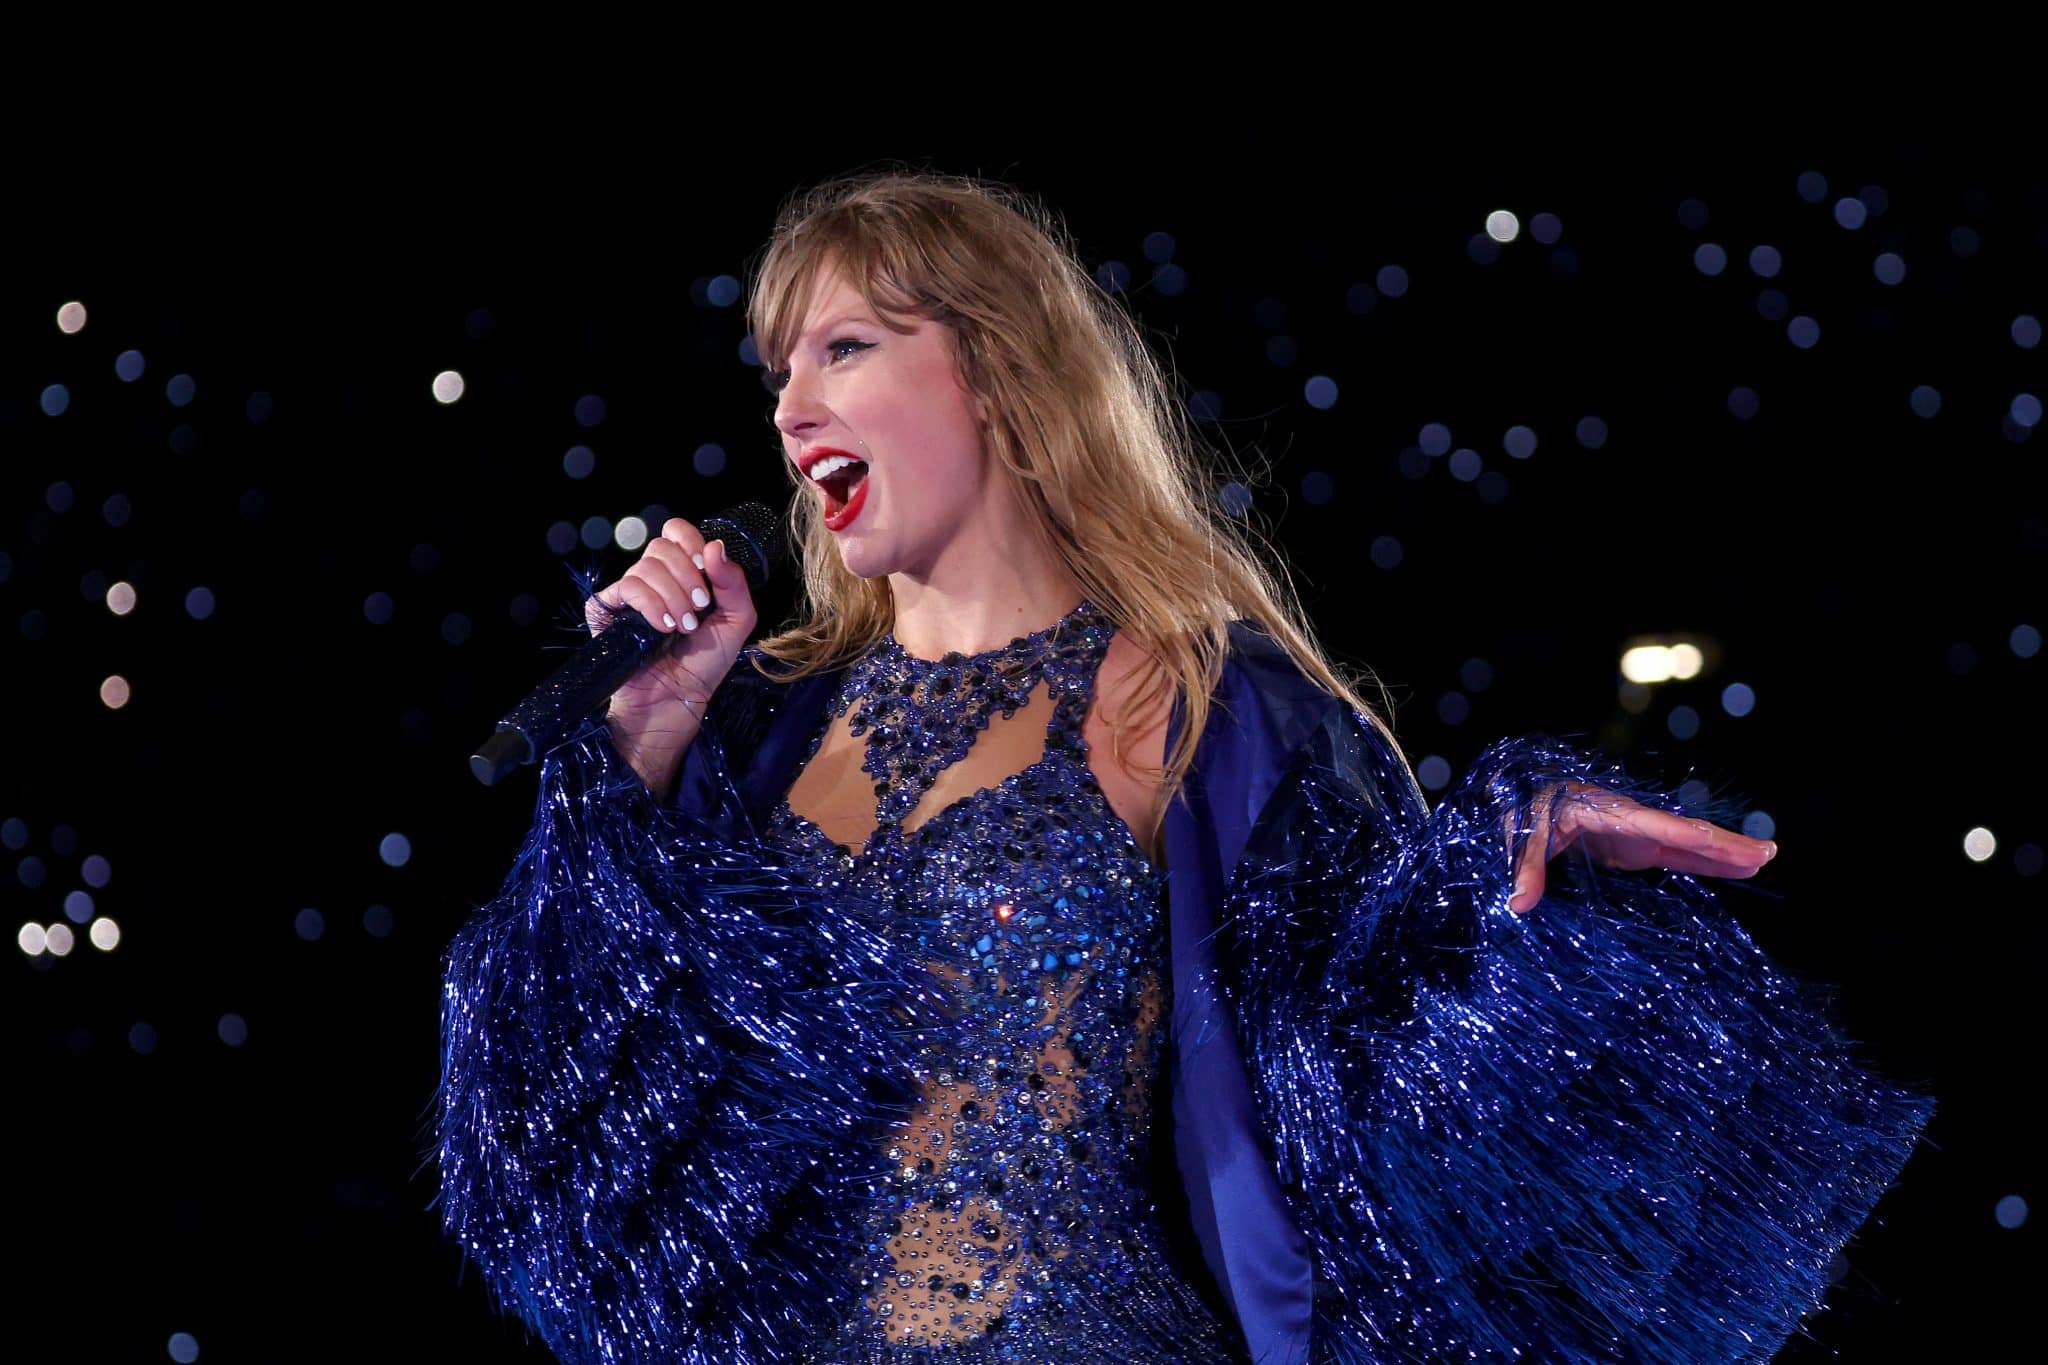 While many rock artists have crossed over to country, other singers like Taylor Swift left the genre to sing something else